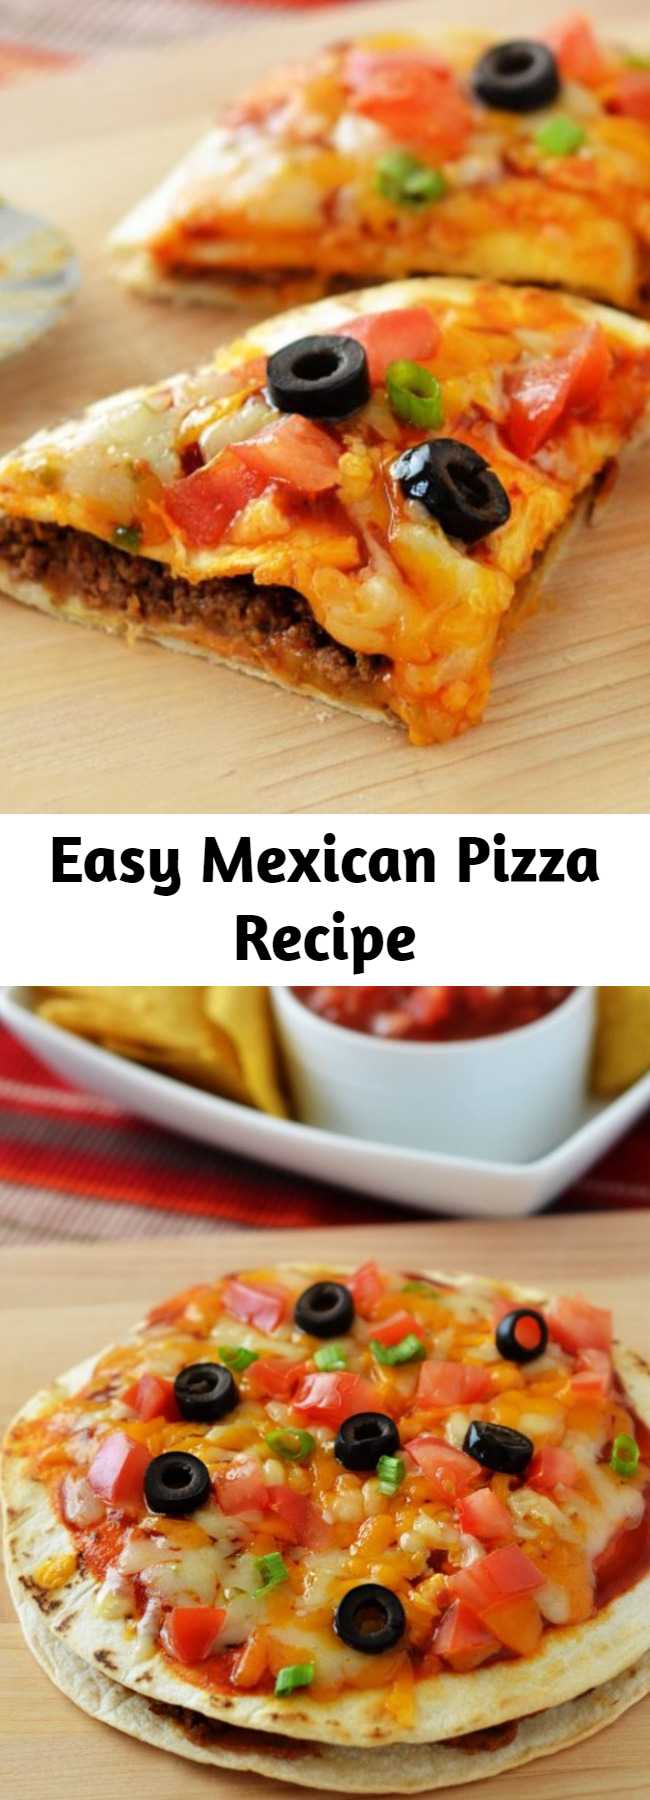 Easy Mexican Pizza Recipe - Mexican Pizza is filled with seasoned ground beef, beans, cheese and enchilada sauce stuffed between two golden flour tortillas. These are a delicious twist on traditional pizza! These will be a hit with the whole family!